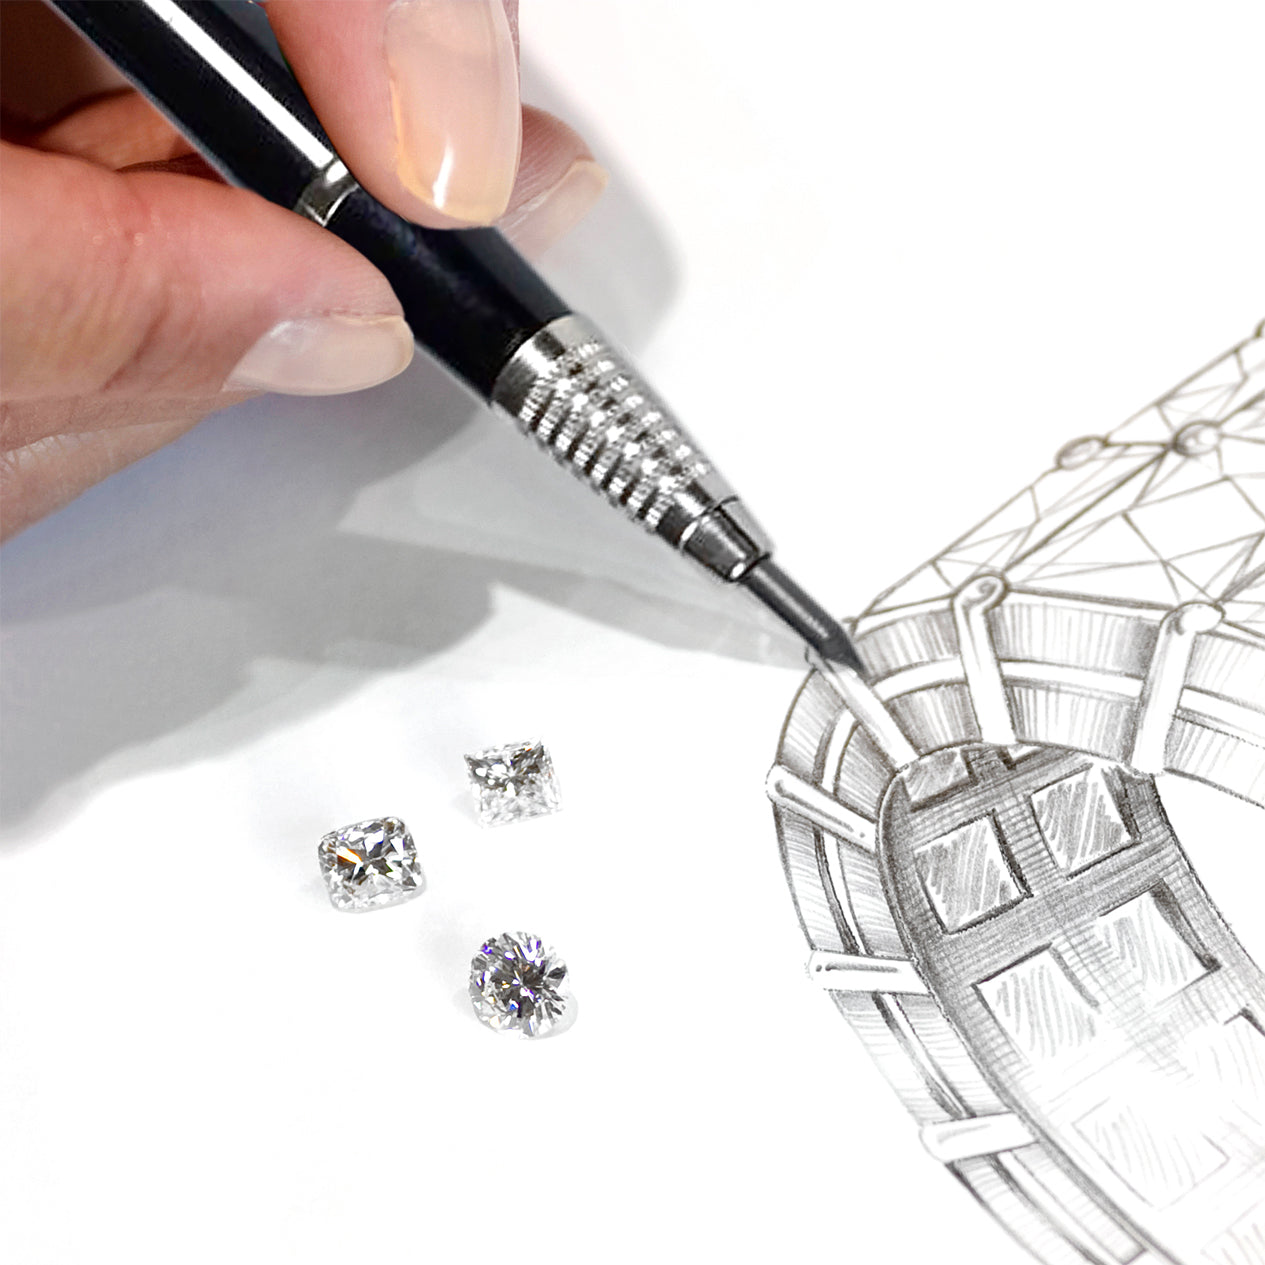 A detailed design drawing of a ring and some loose diamonds